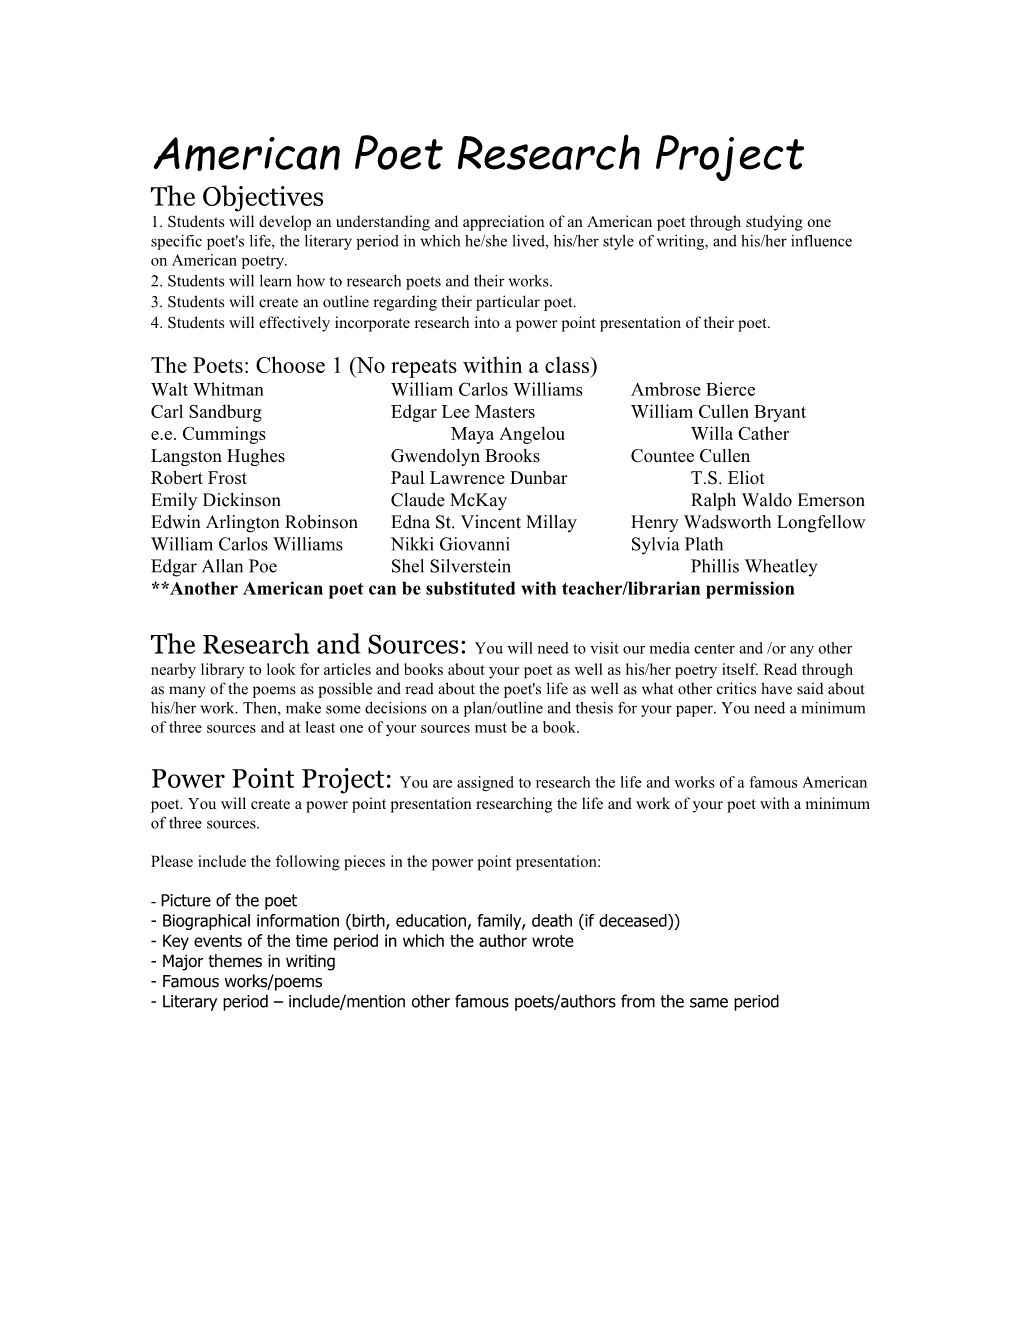 American Poet Research Project